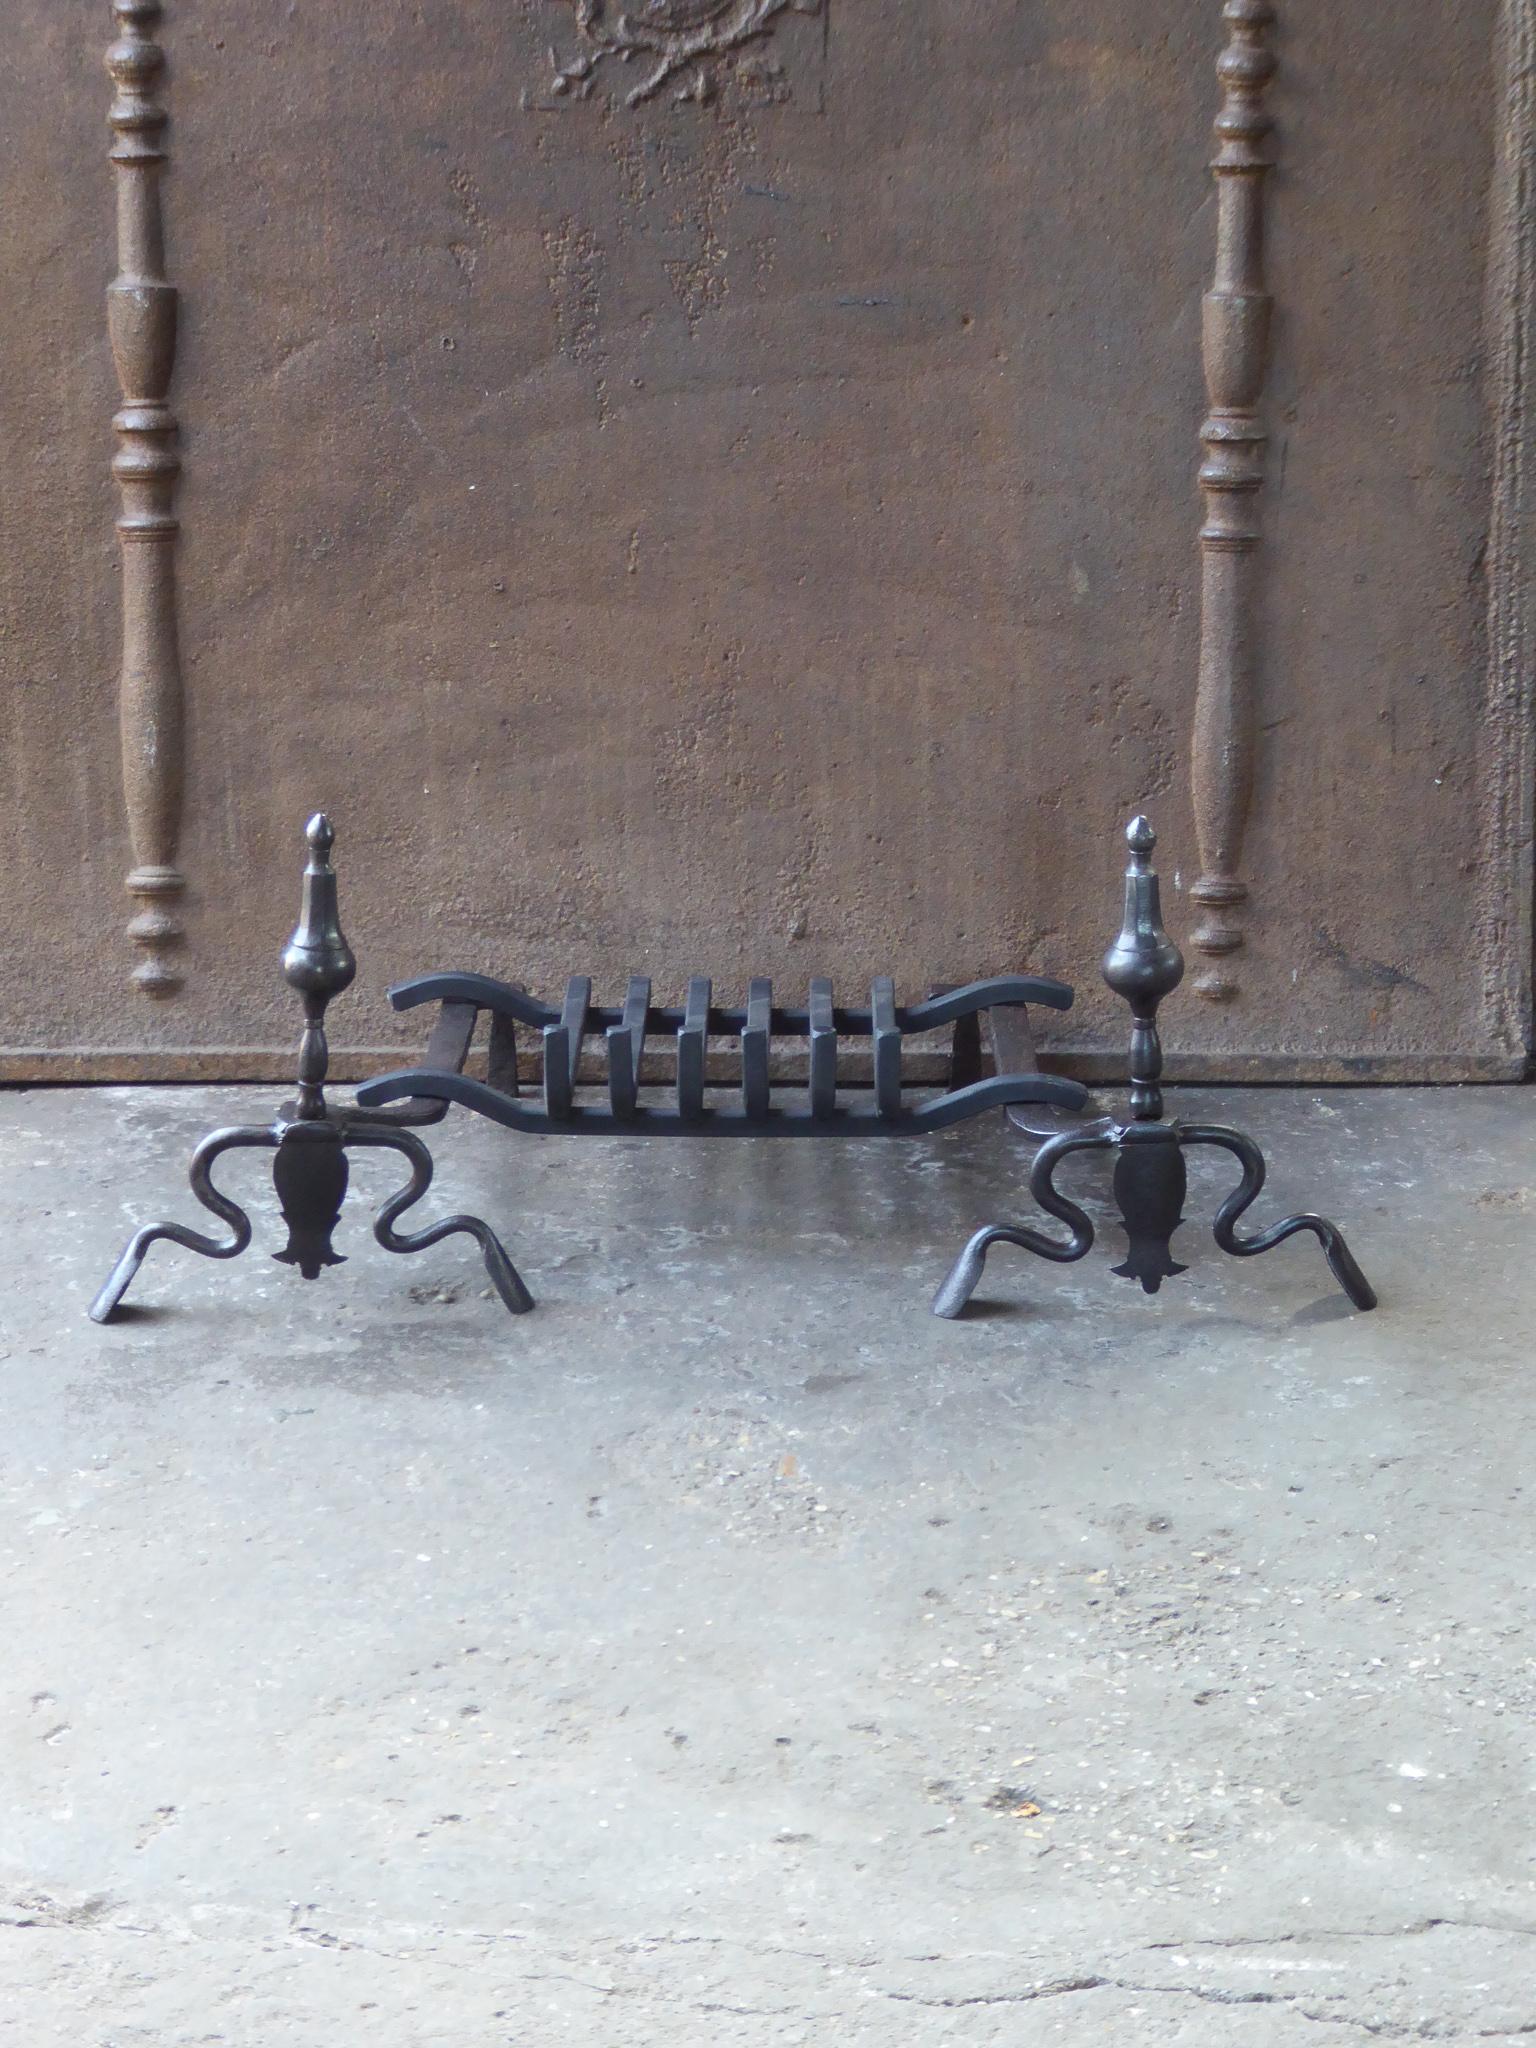 18th century French Louis XV period fireplace basket, fire basket made of wrought iron. The basket is in a good condition and is fully functional.